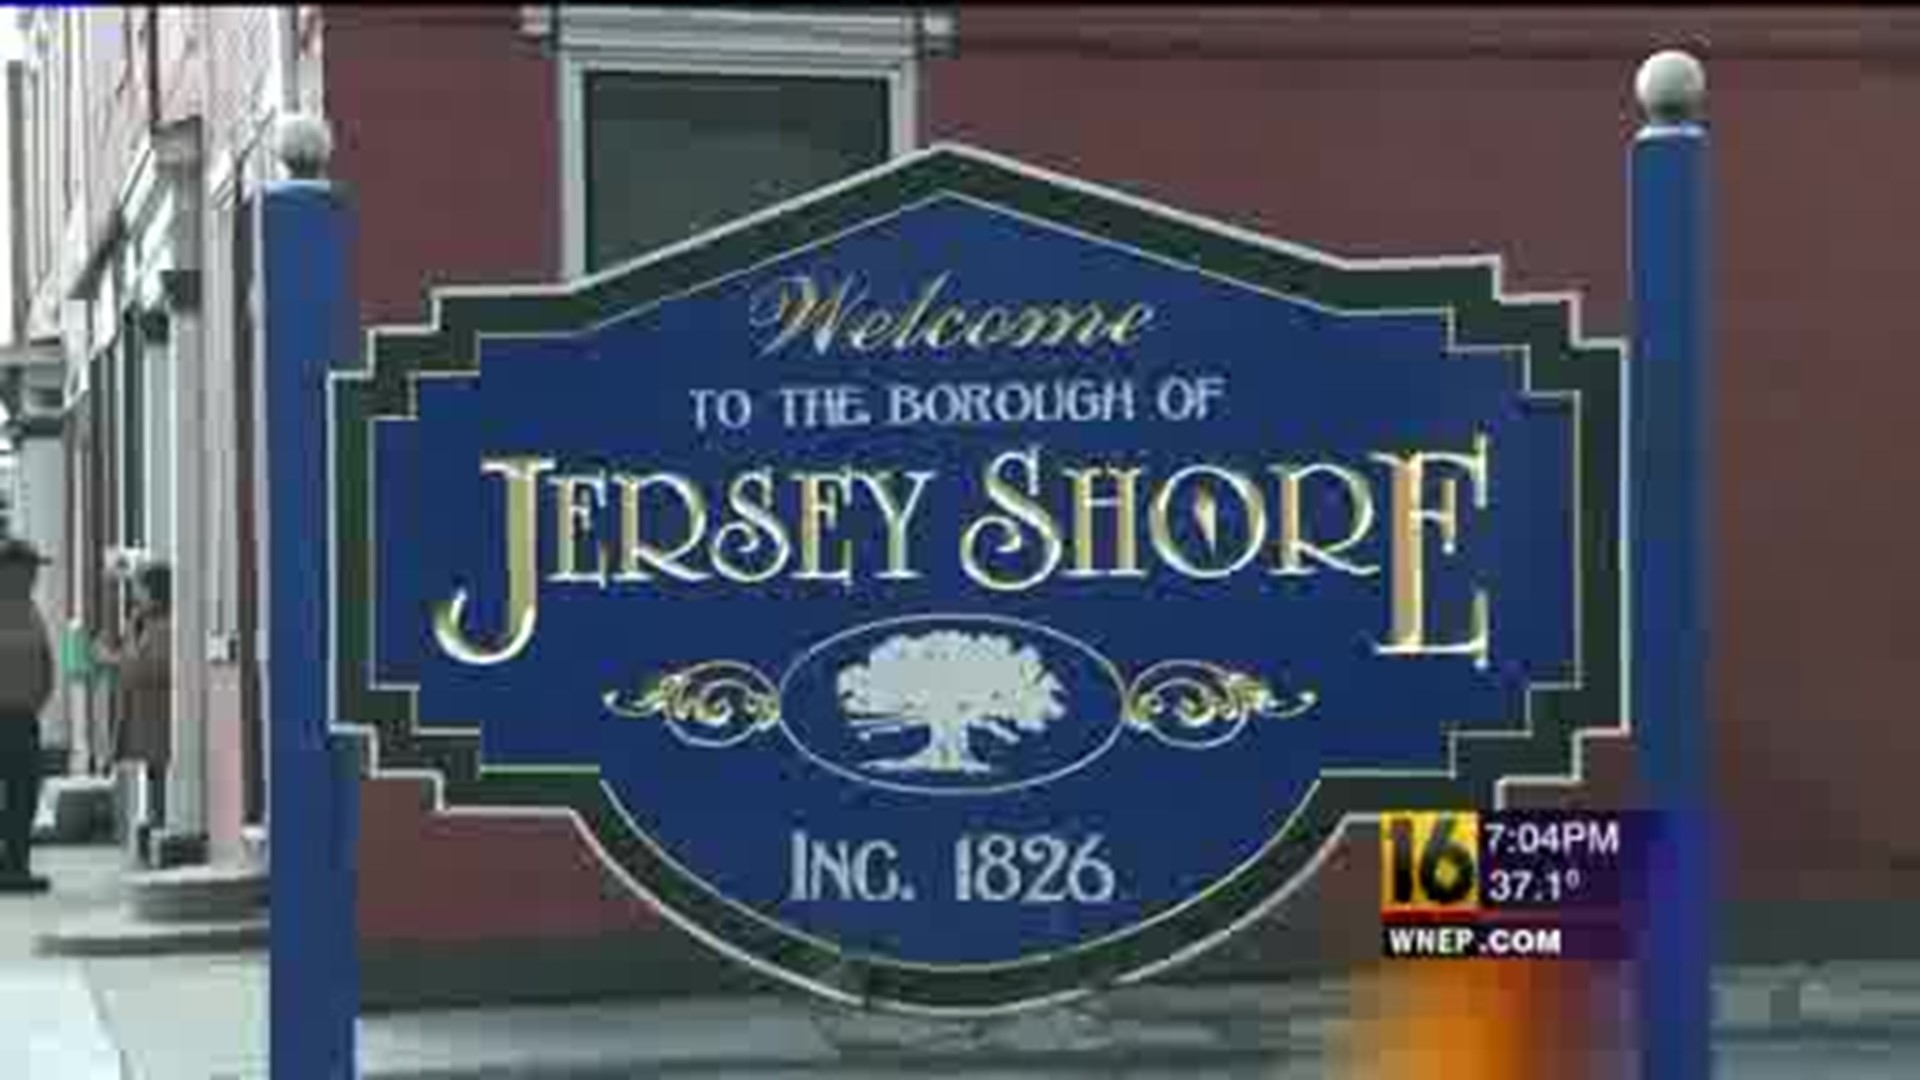 MTV's "Jersey Shore" in PA?